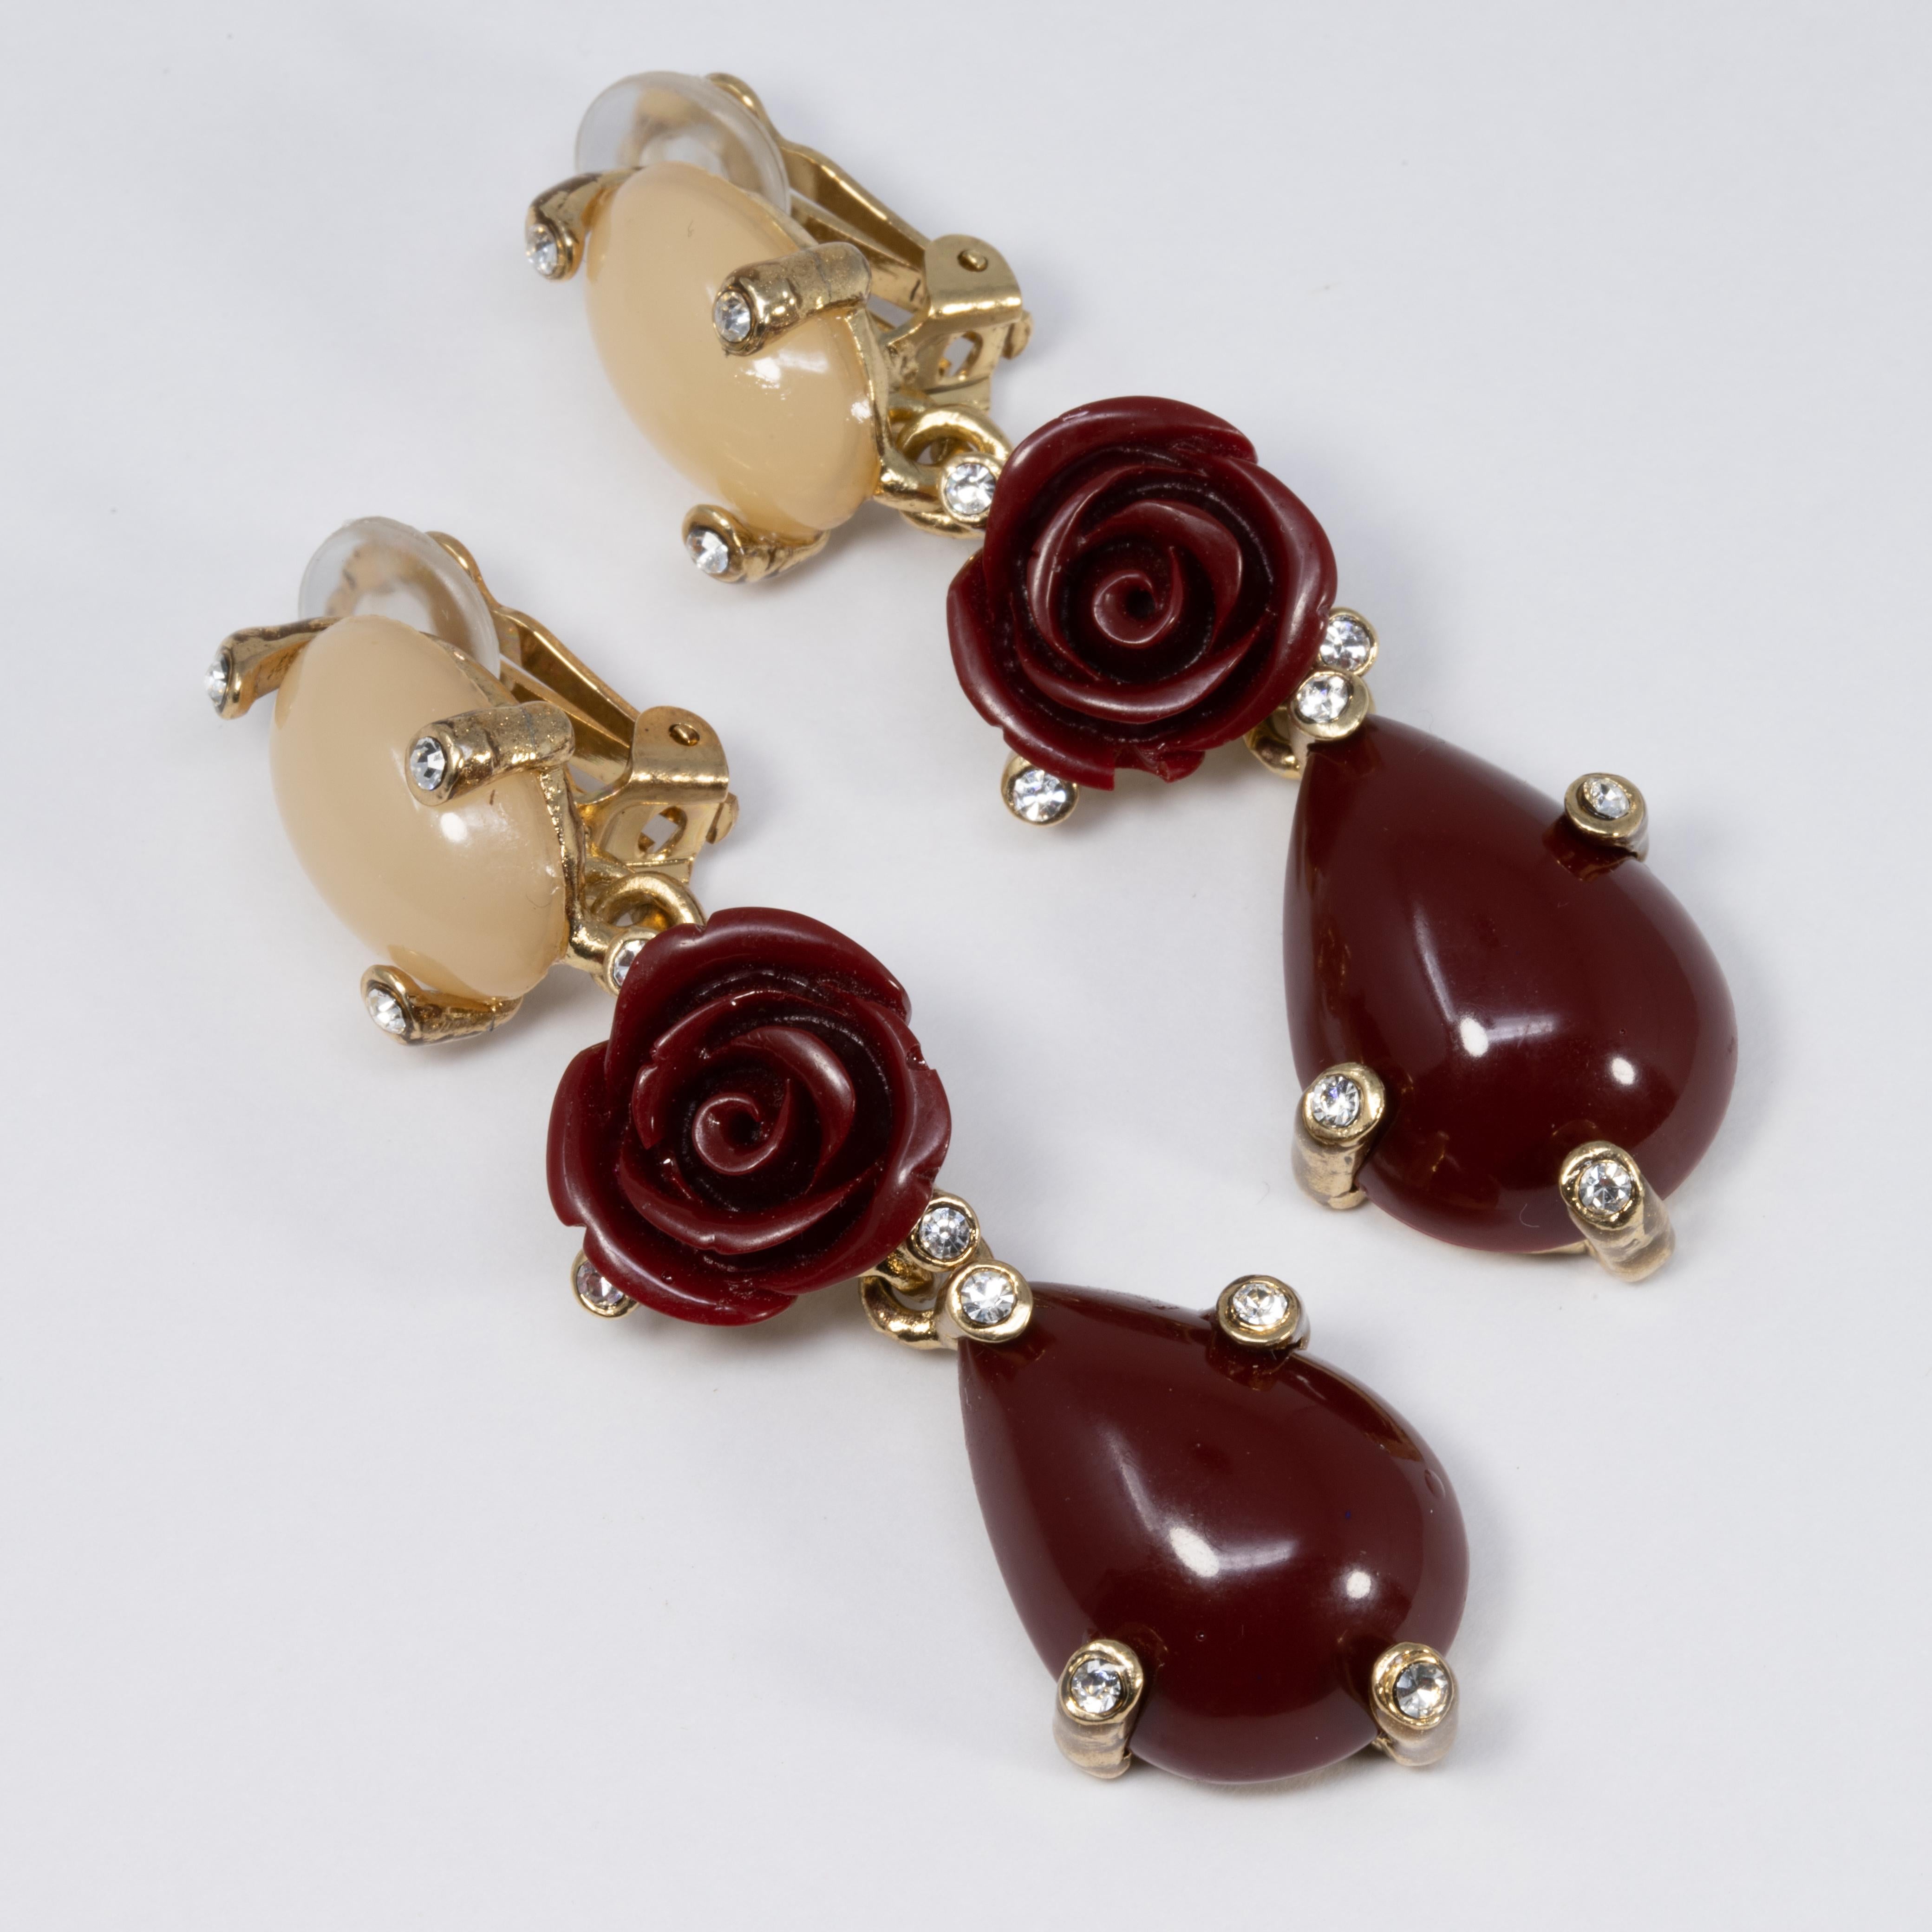 A pair of dangling clip on earrings with gorgeous floral themes by Oscar de la Renta. Each earring features two prong set cabochons and a red rose, accented with clear crystals.

Hallmarks: Oscar de la Renta, Made in USA